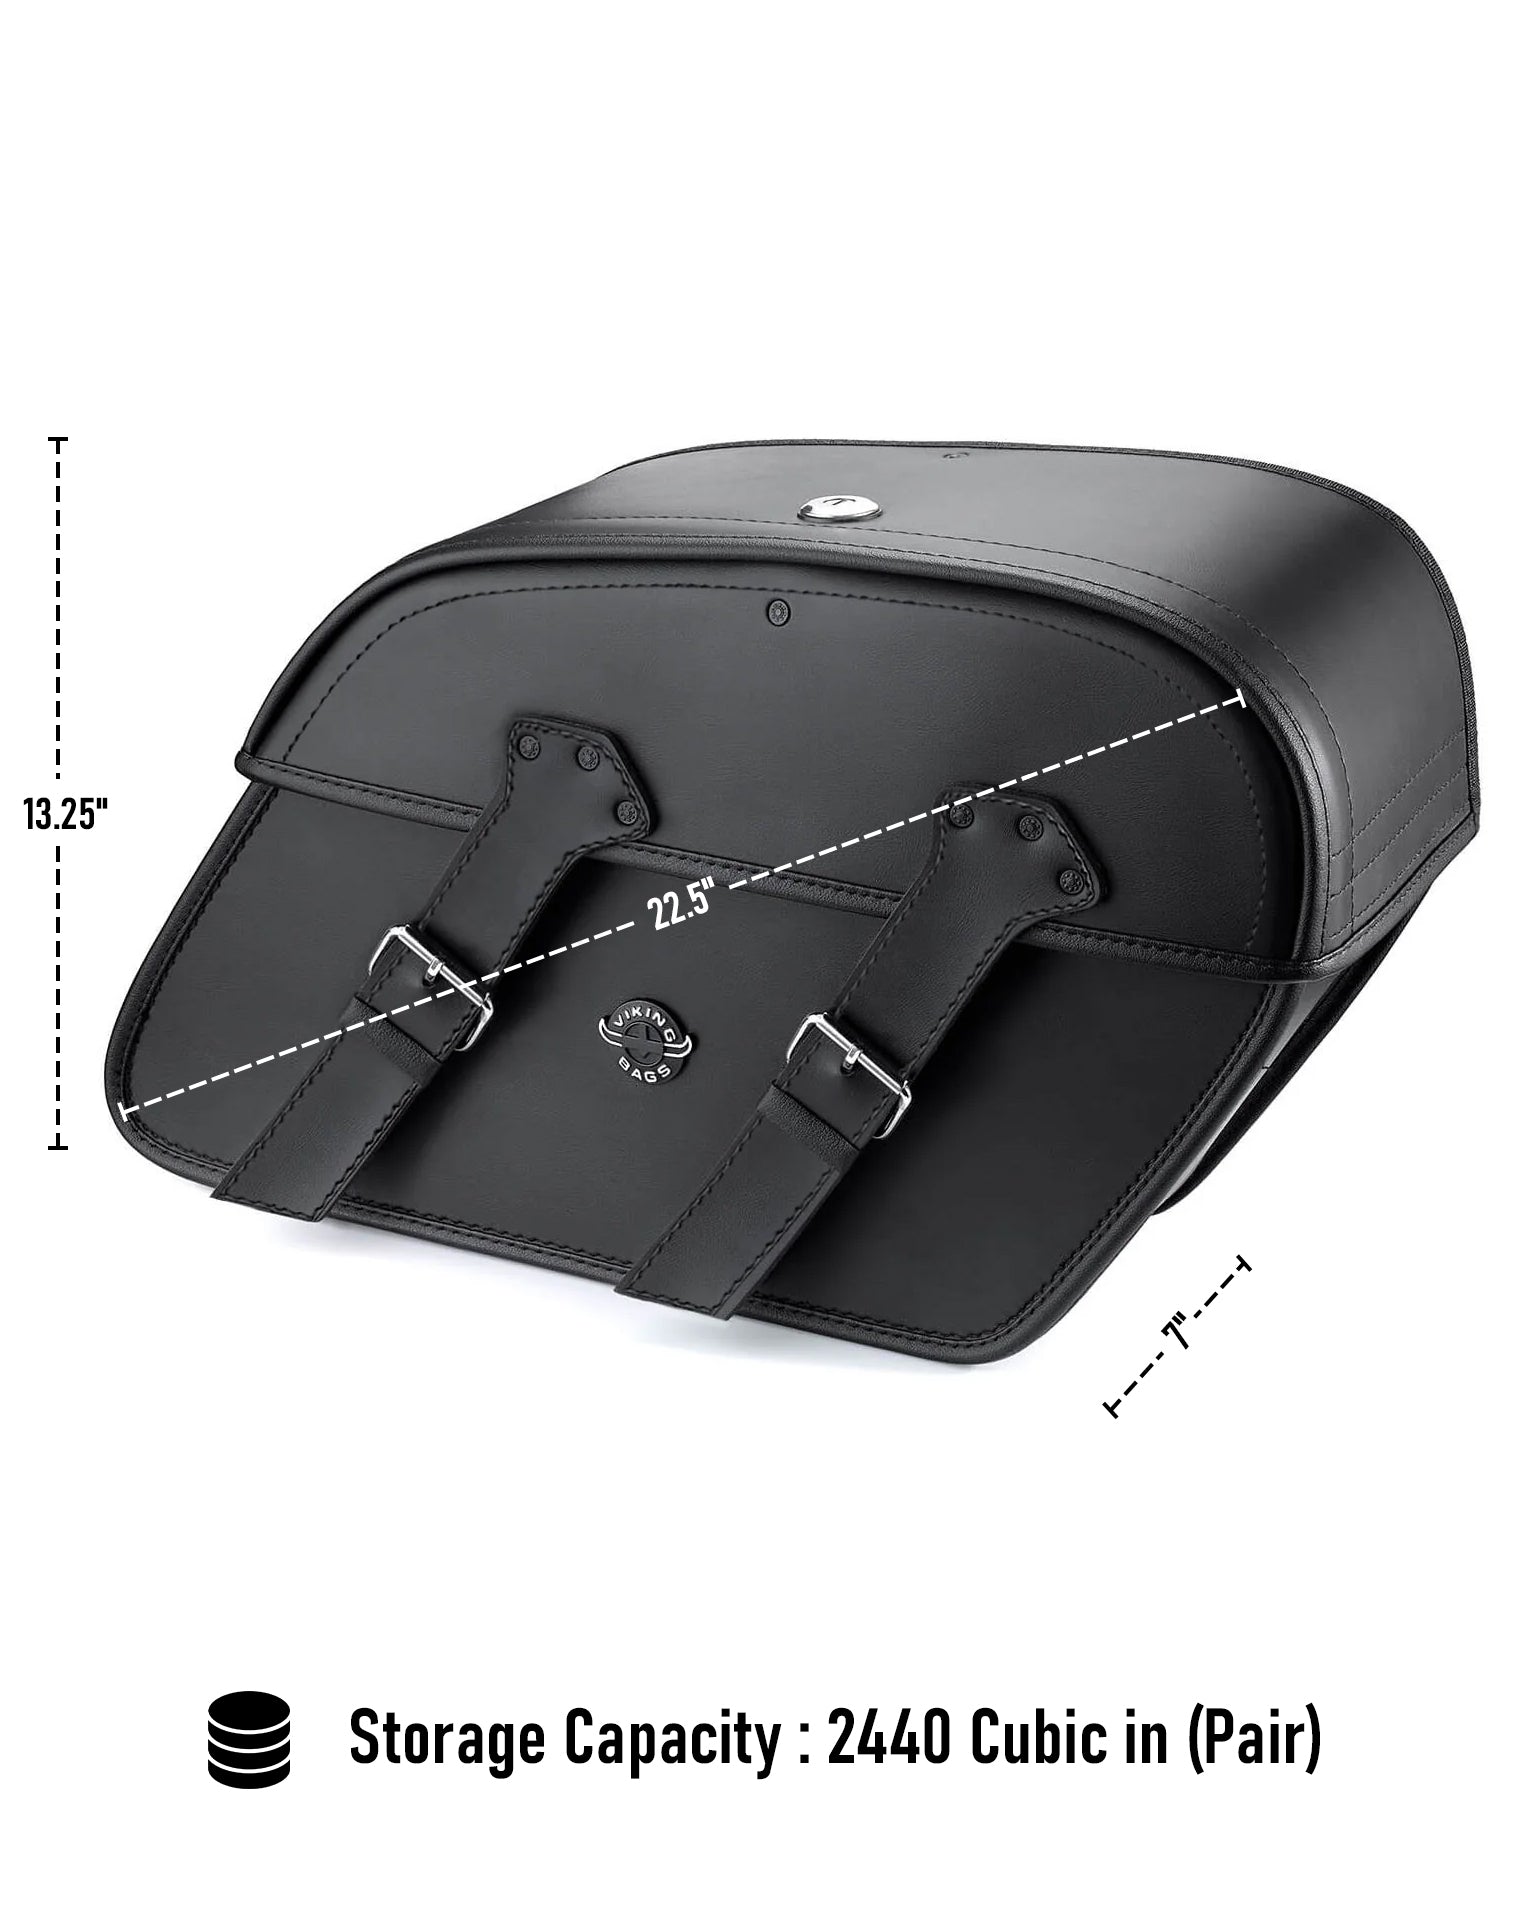 Viking Raven Extra Large Leather Motorcycle Saddlebags For Harley Softail Street Bob Fxbb Can Store Your Ridings Gears